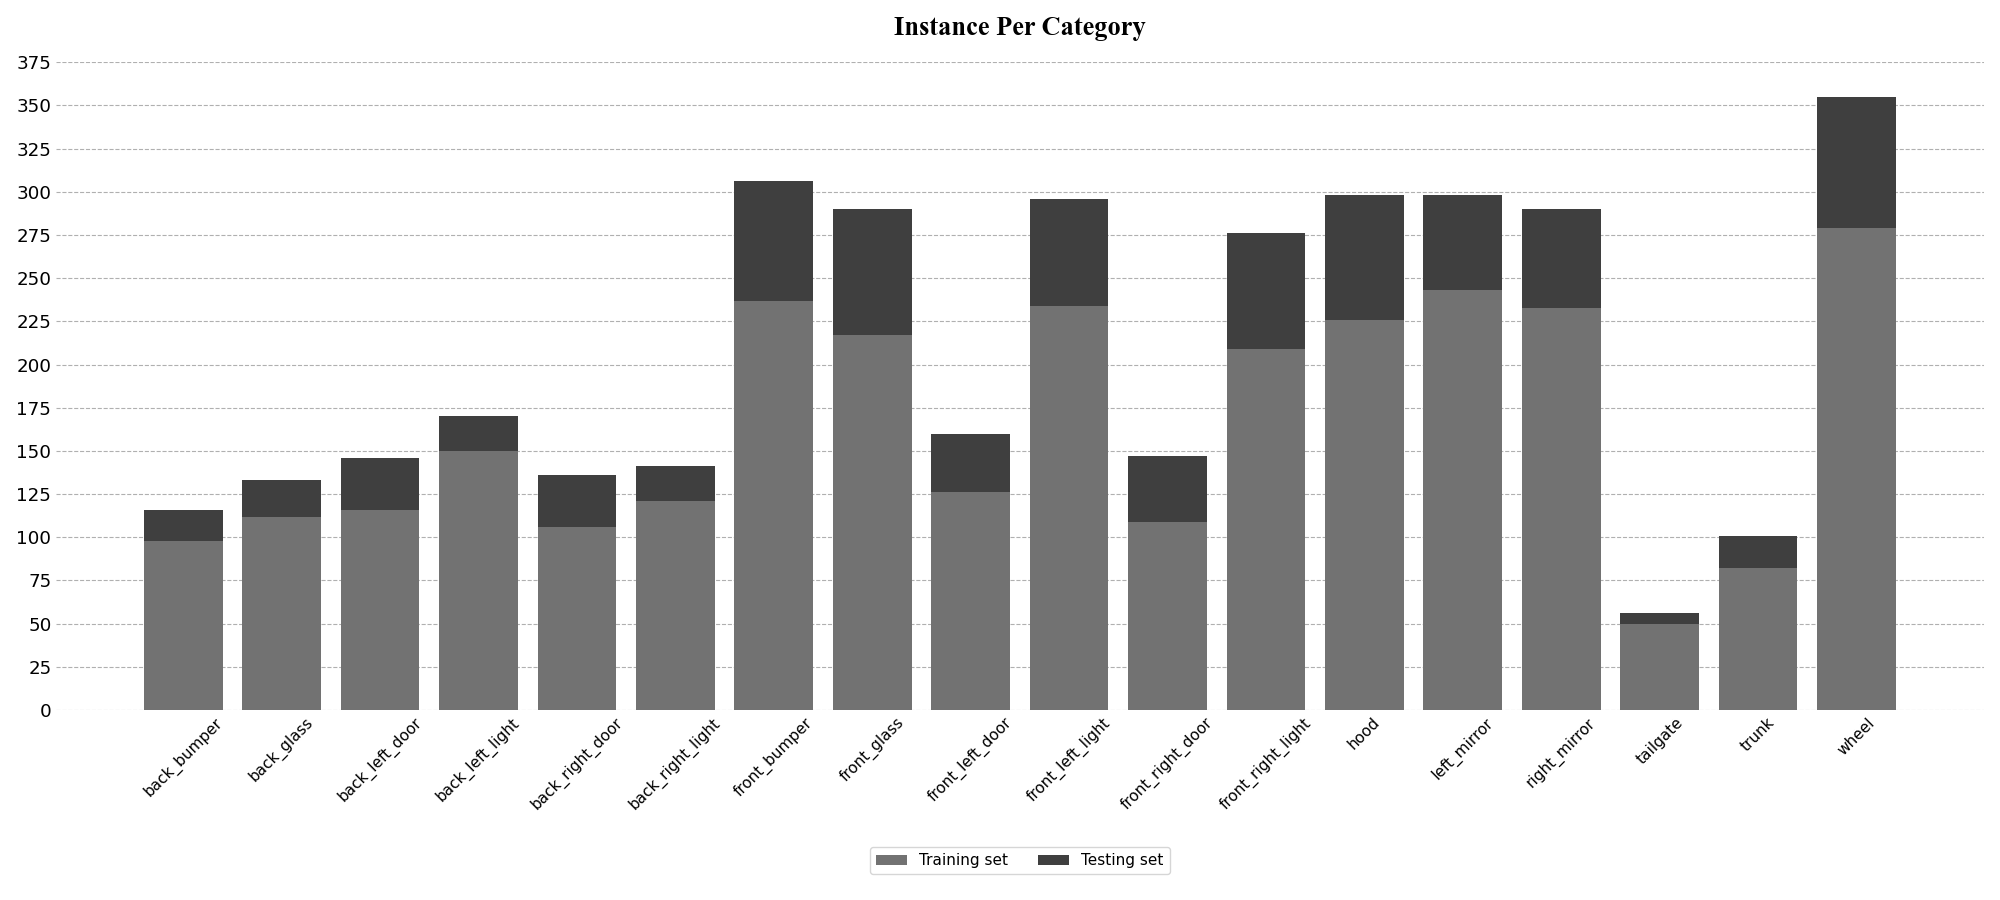 Instance per category